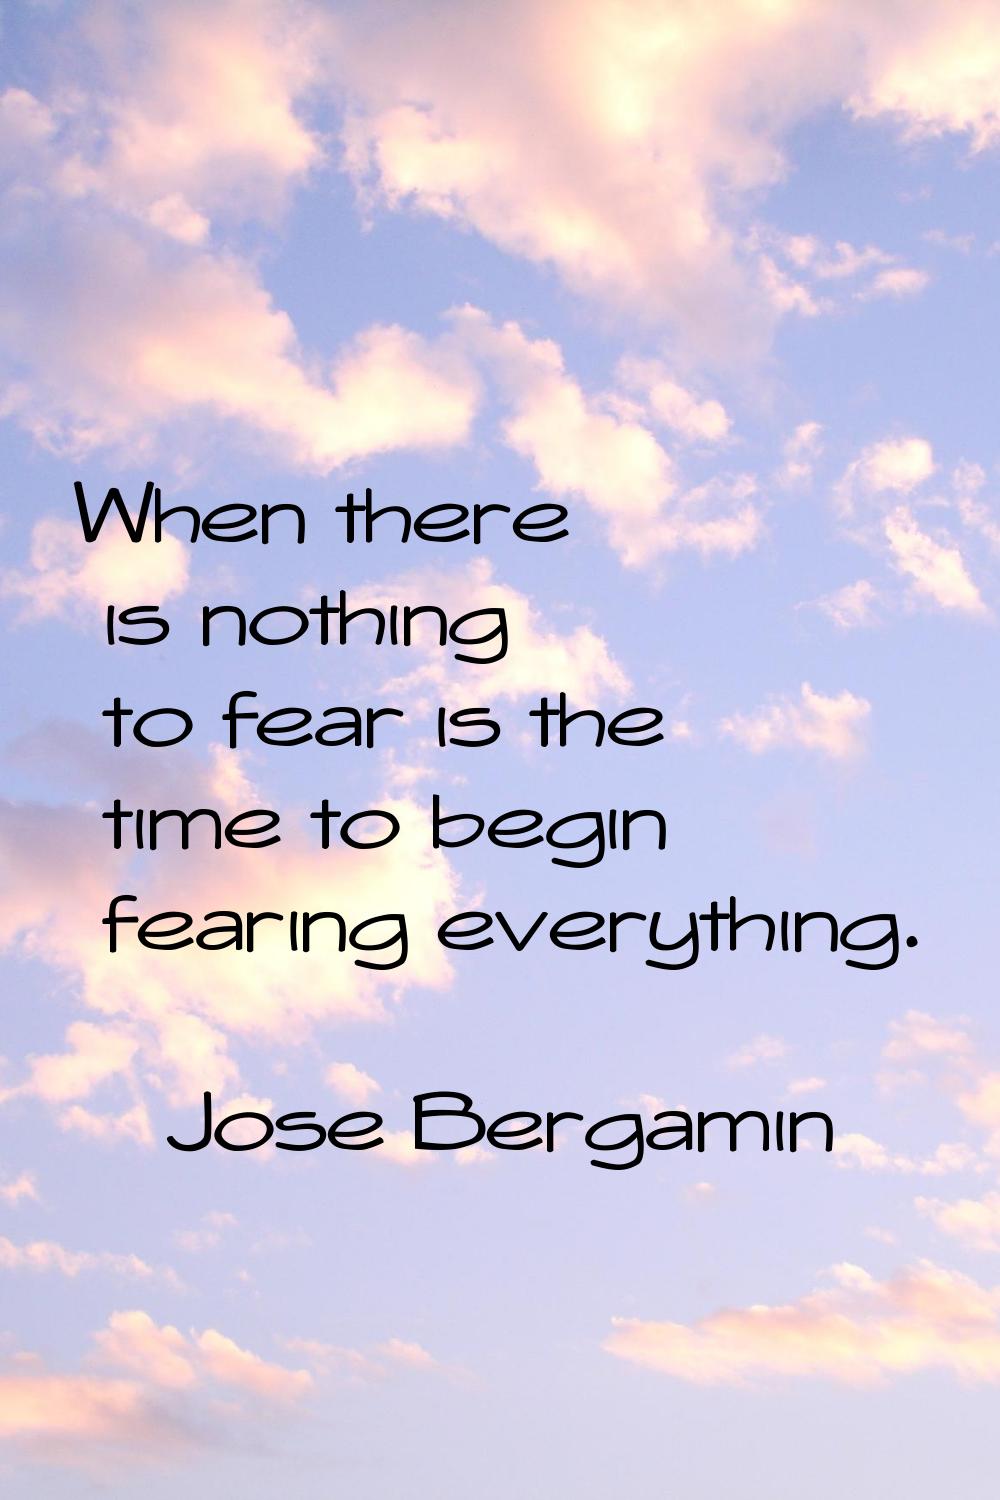 When there is nothing to fear is the time to begin fearing everything.